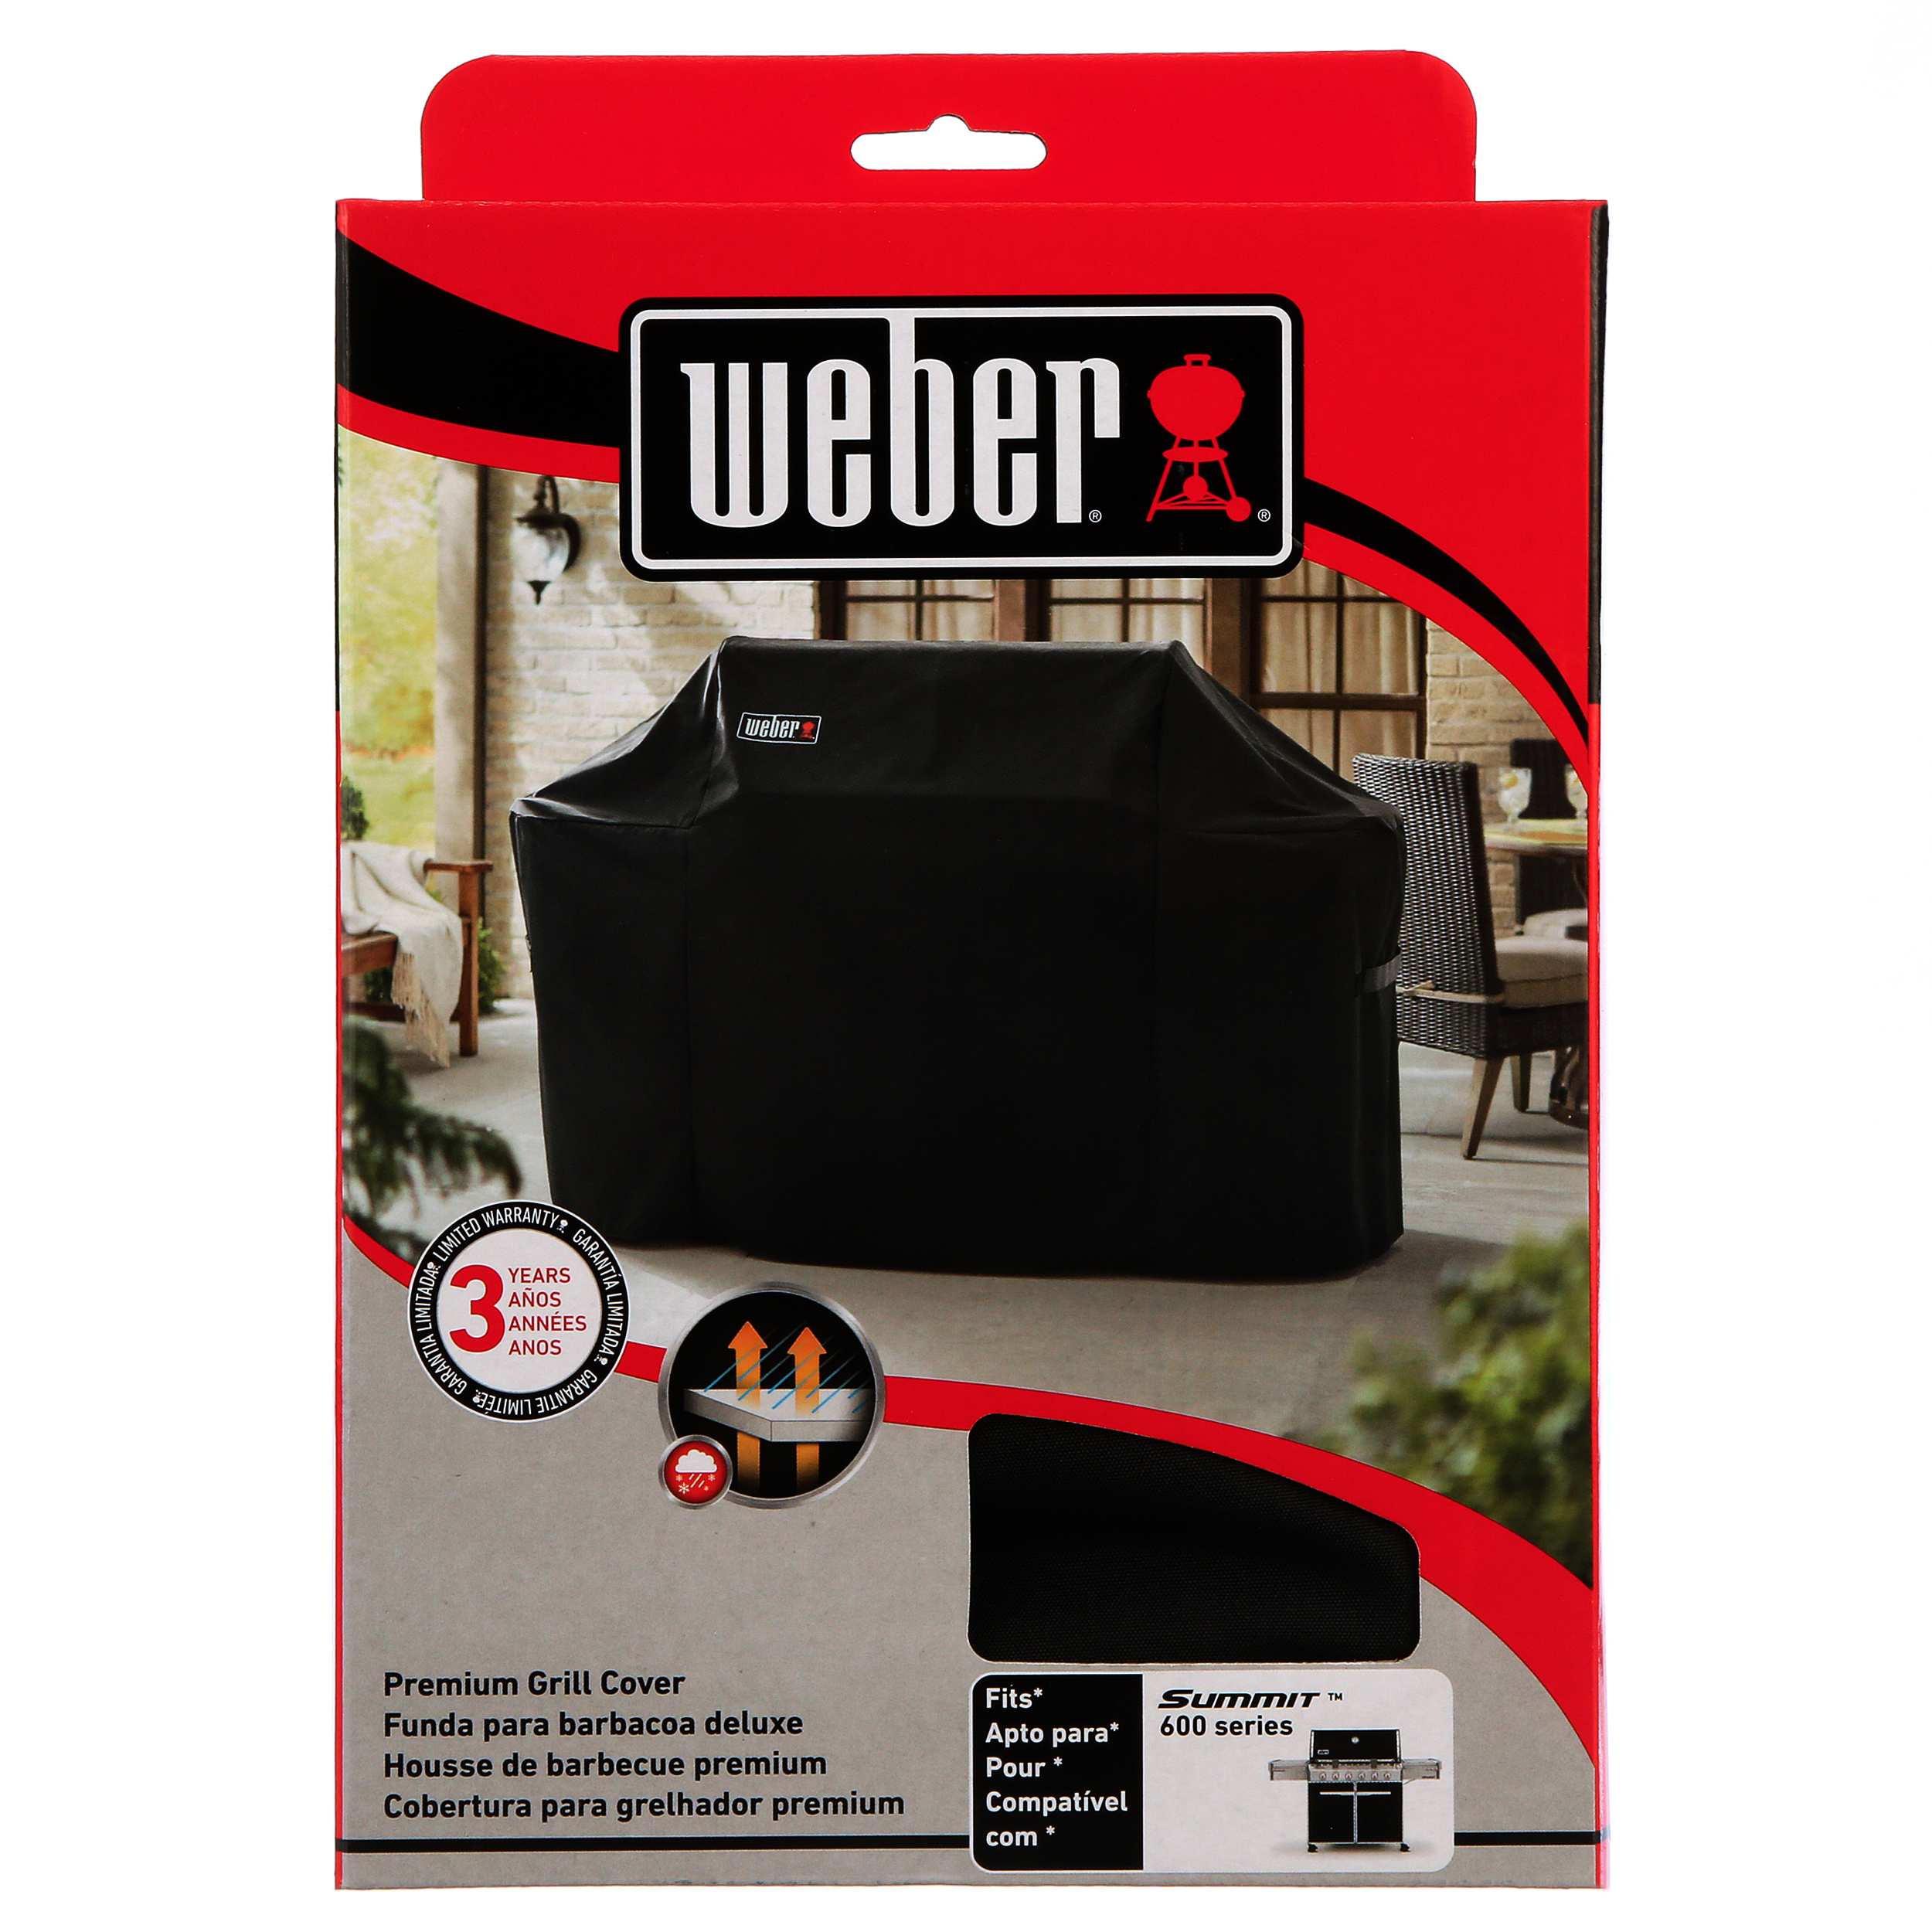 Weber Summit 600 Series Premium Grill Cover - image 4 of 8